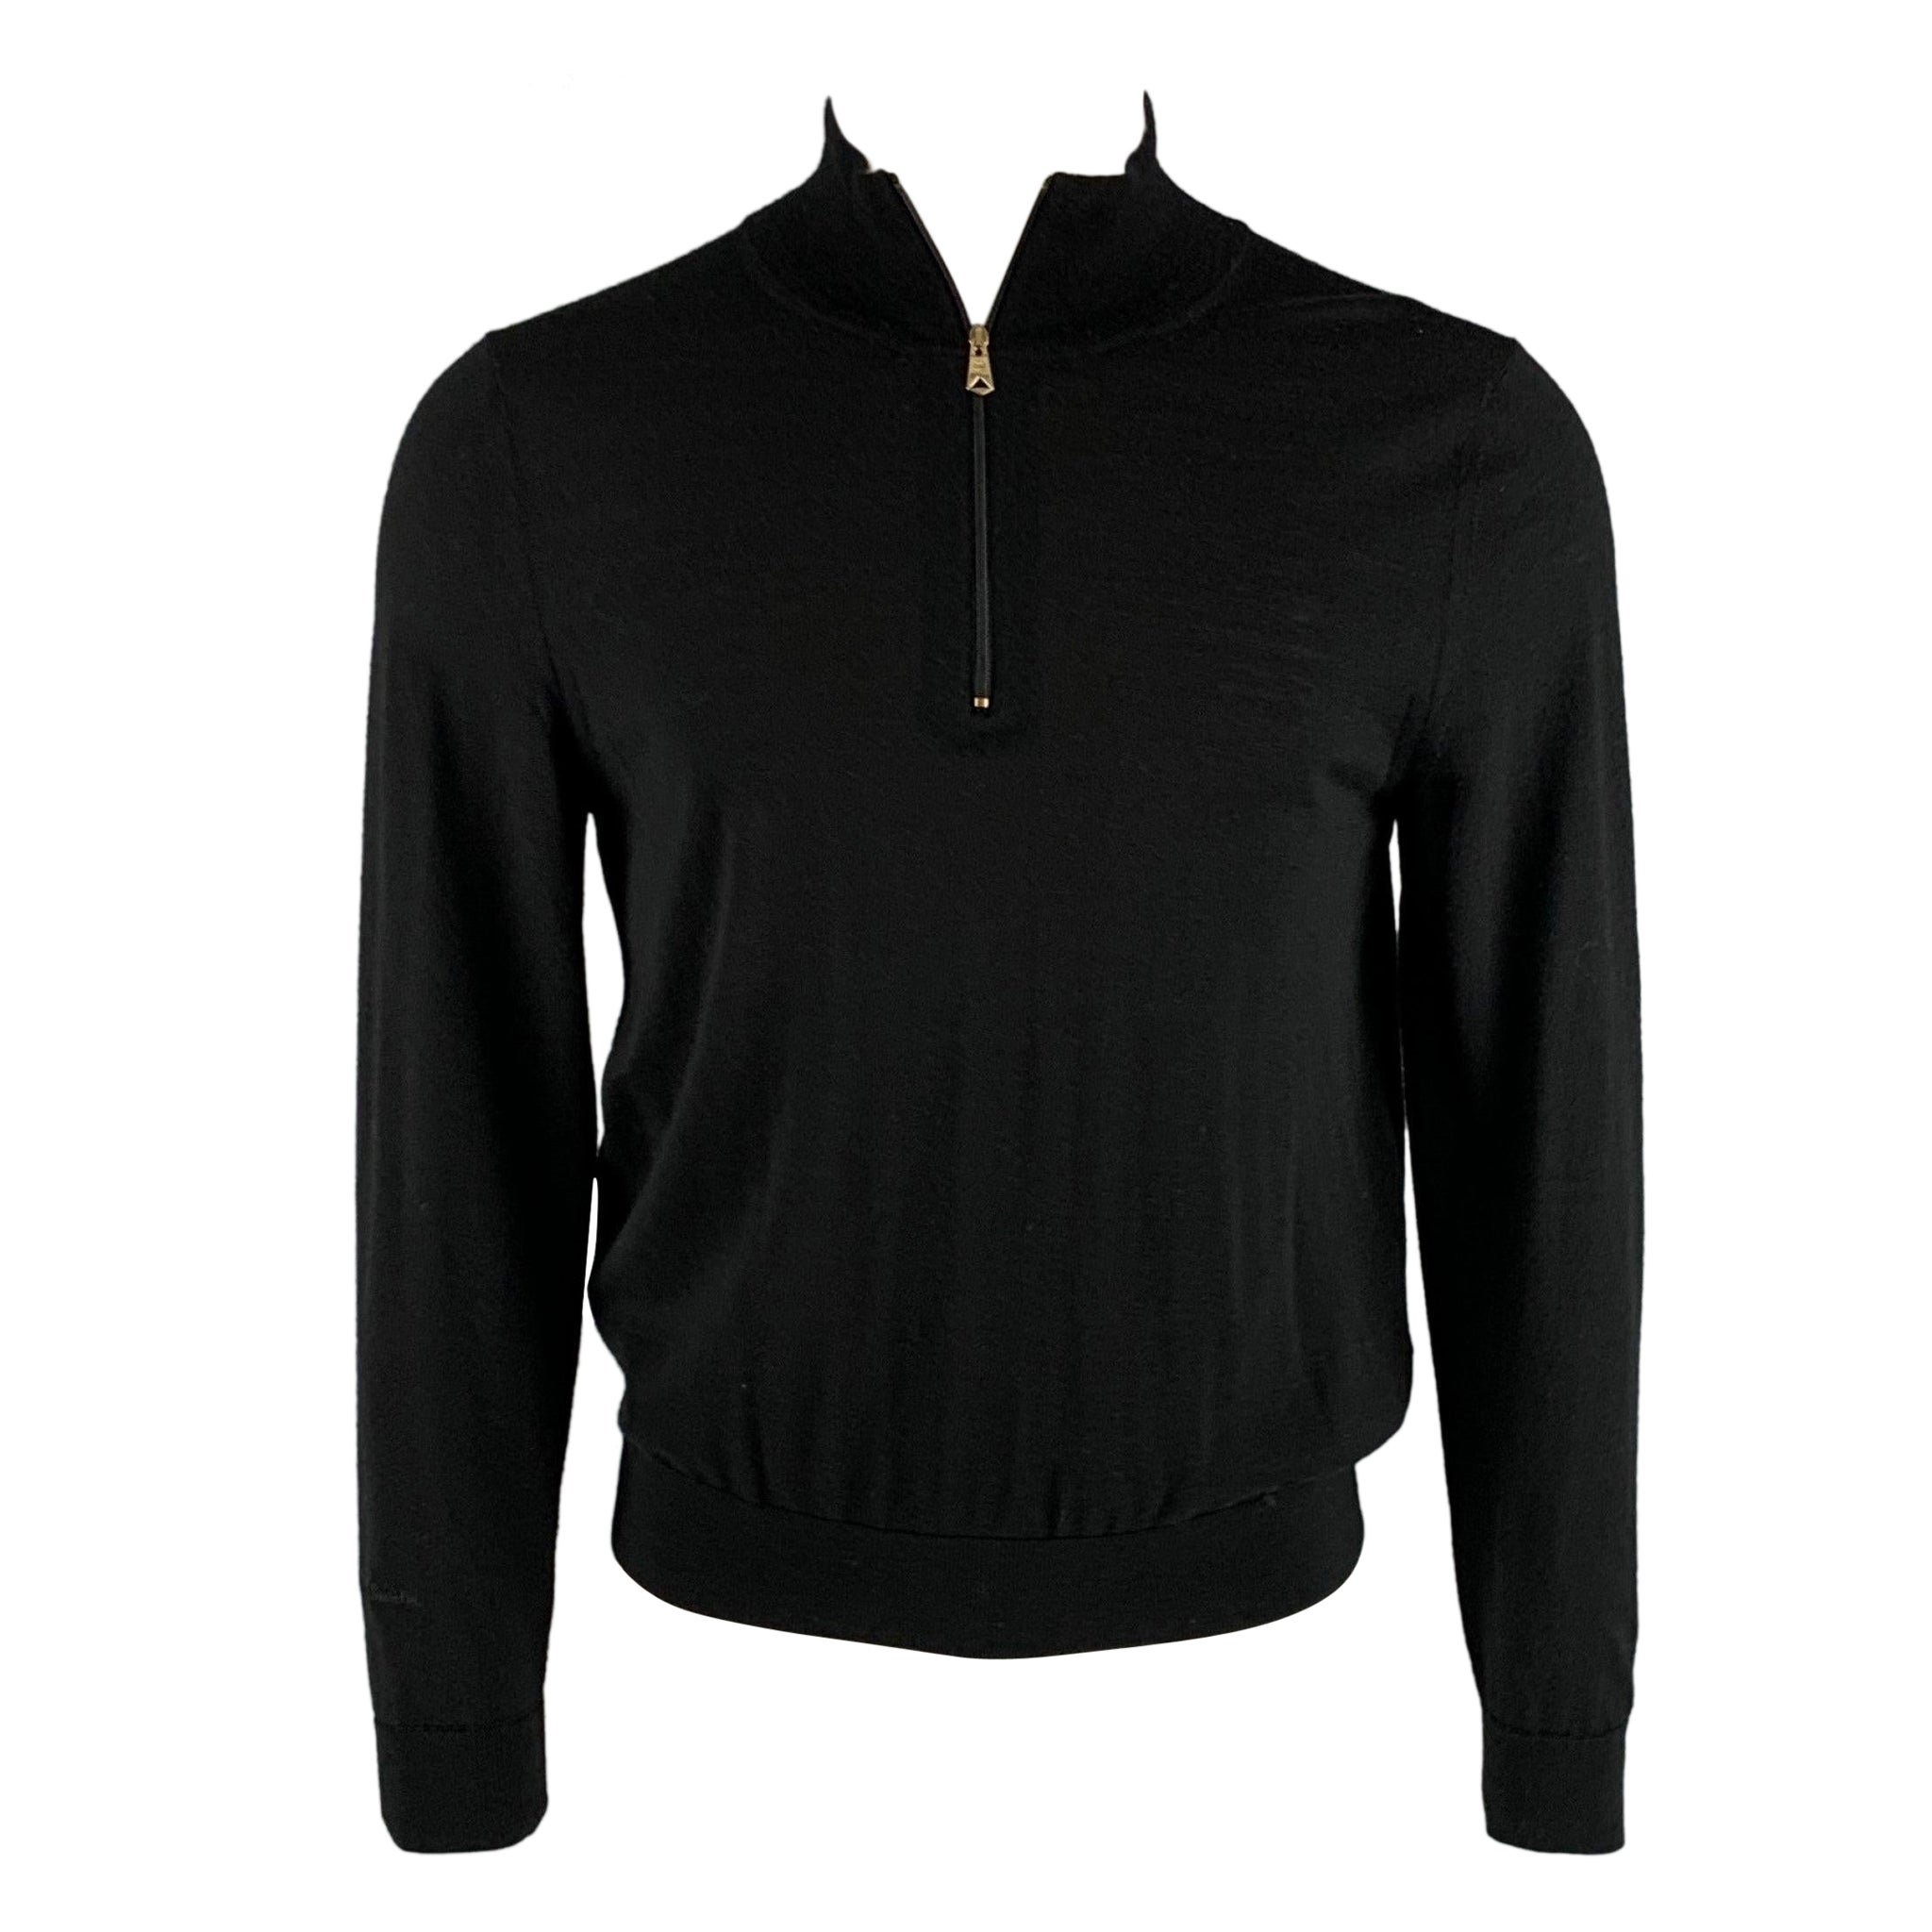 PAUL SMITH Size S Black Merino Wool Zip Up Pullover For Sale